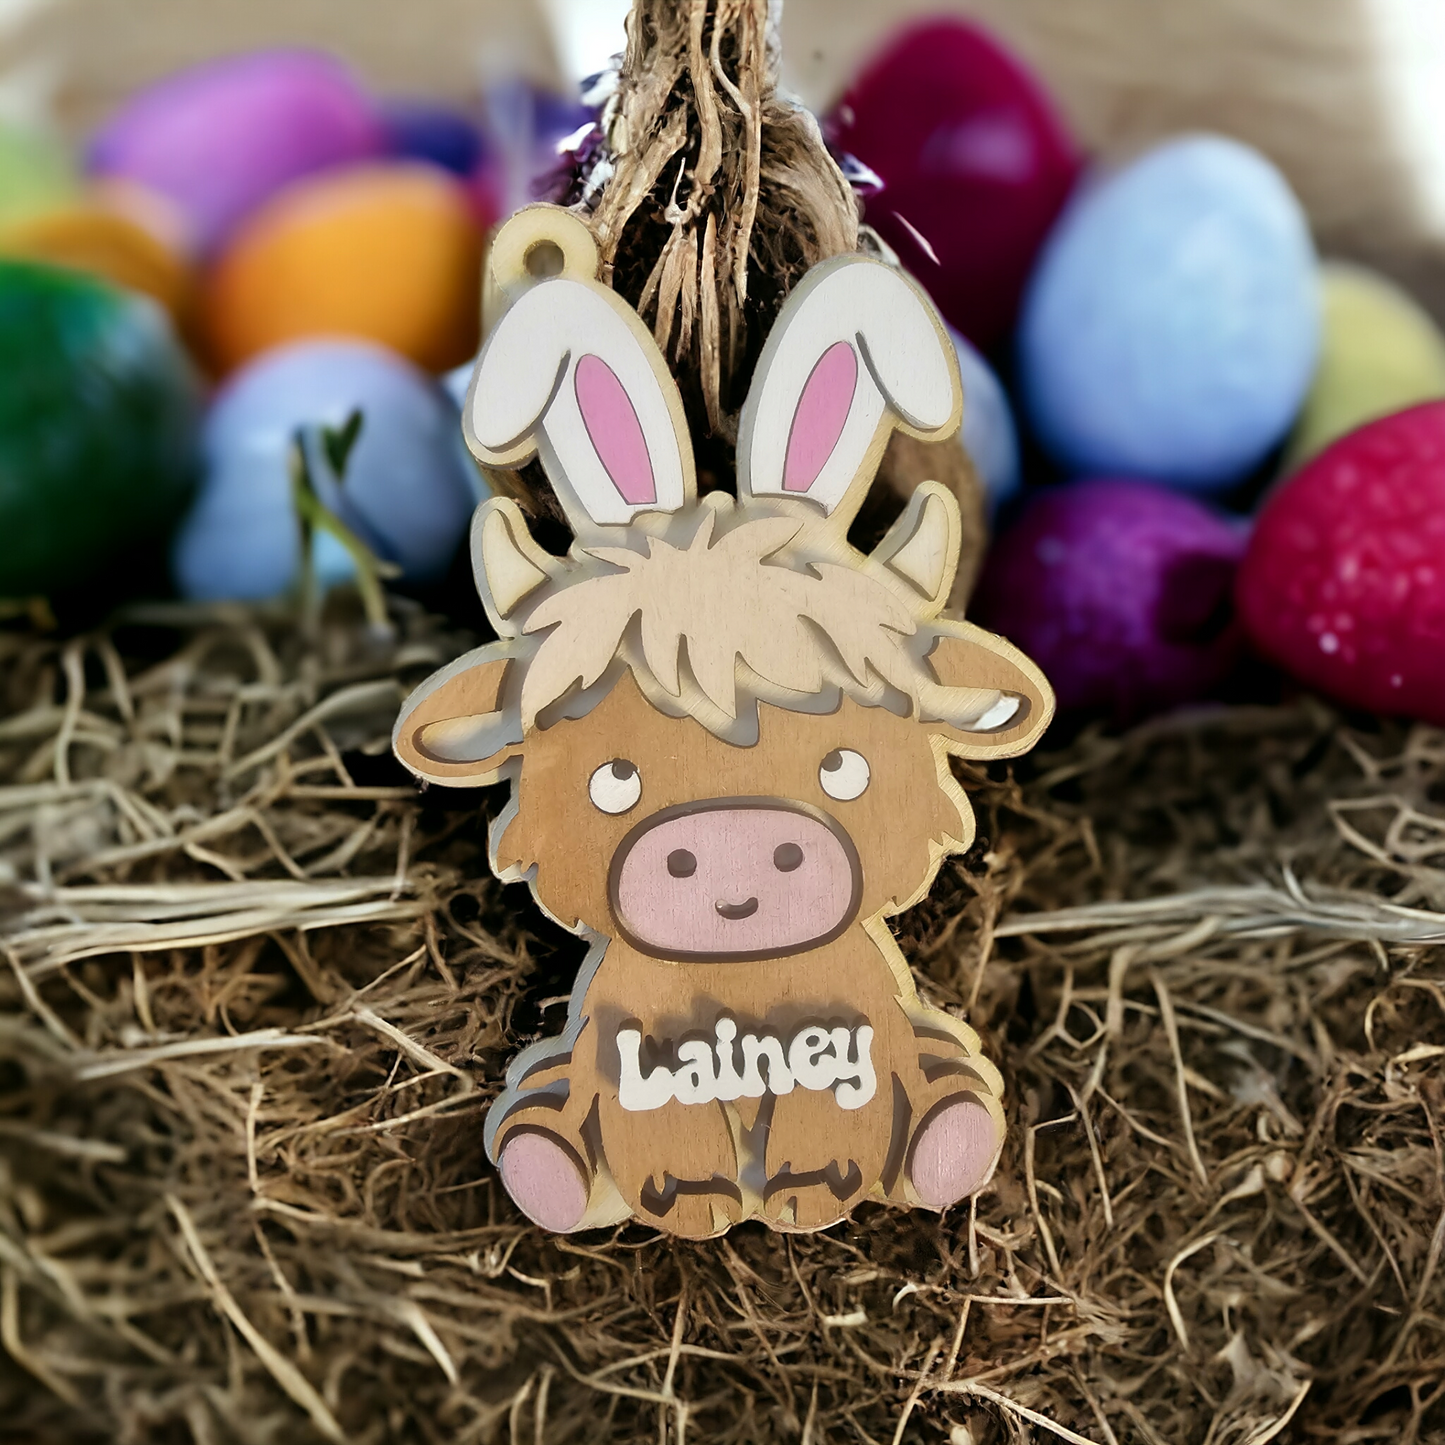 Easter Tags